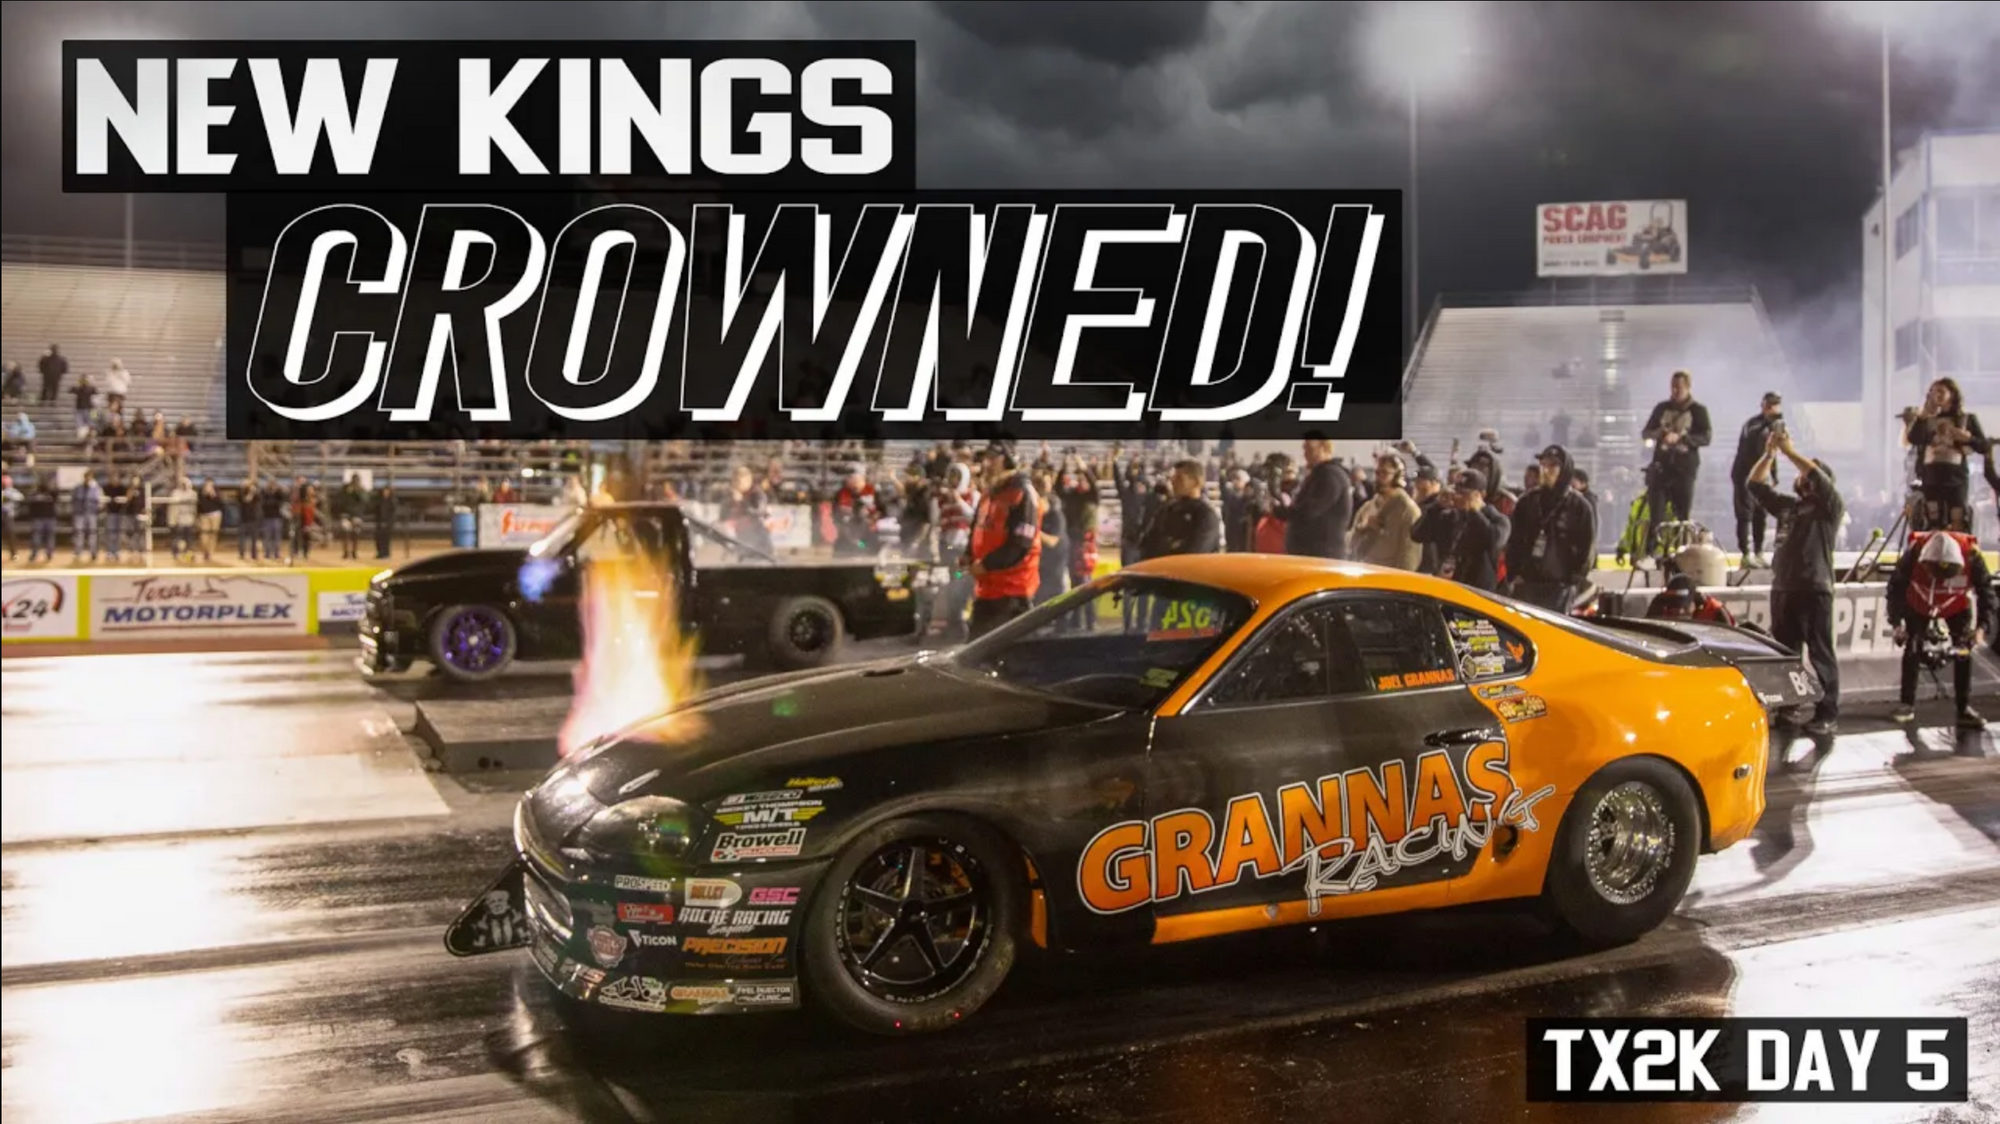 Unexpected CHAMPIONS @ TX2K Drag Racing FINALS! (TX2K Day 5)